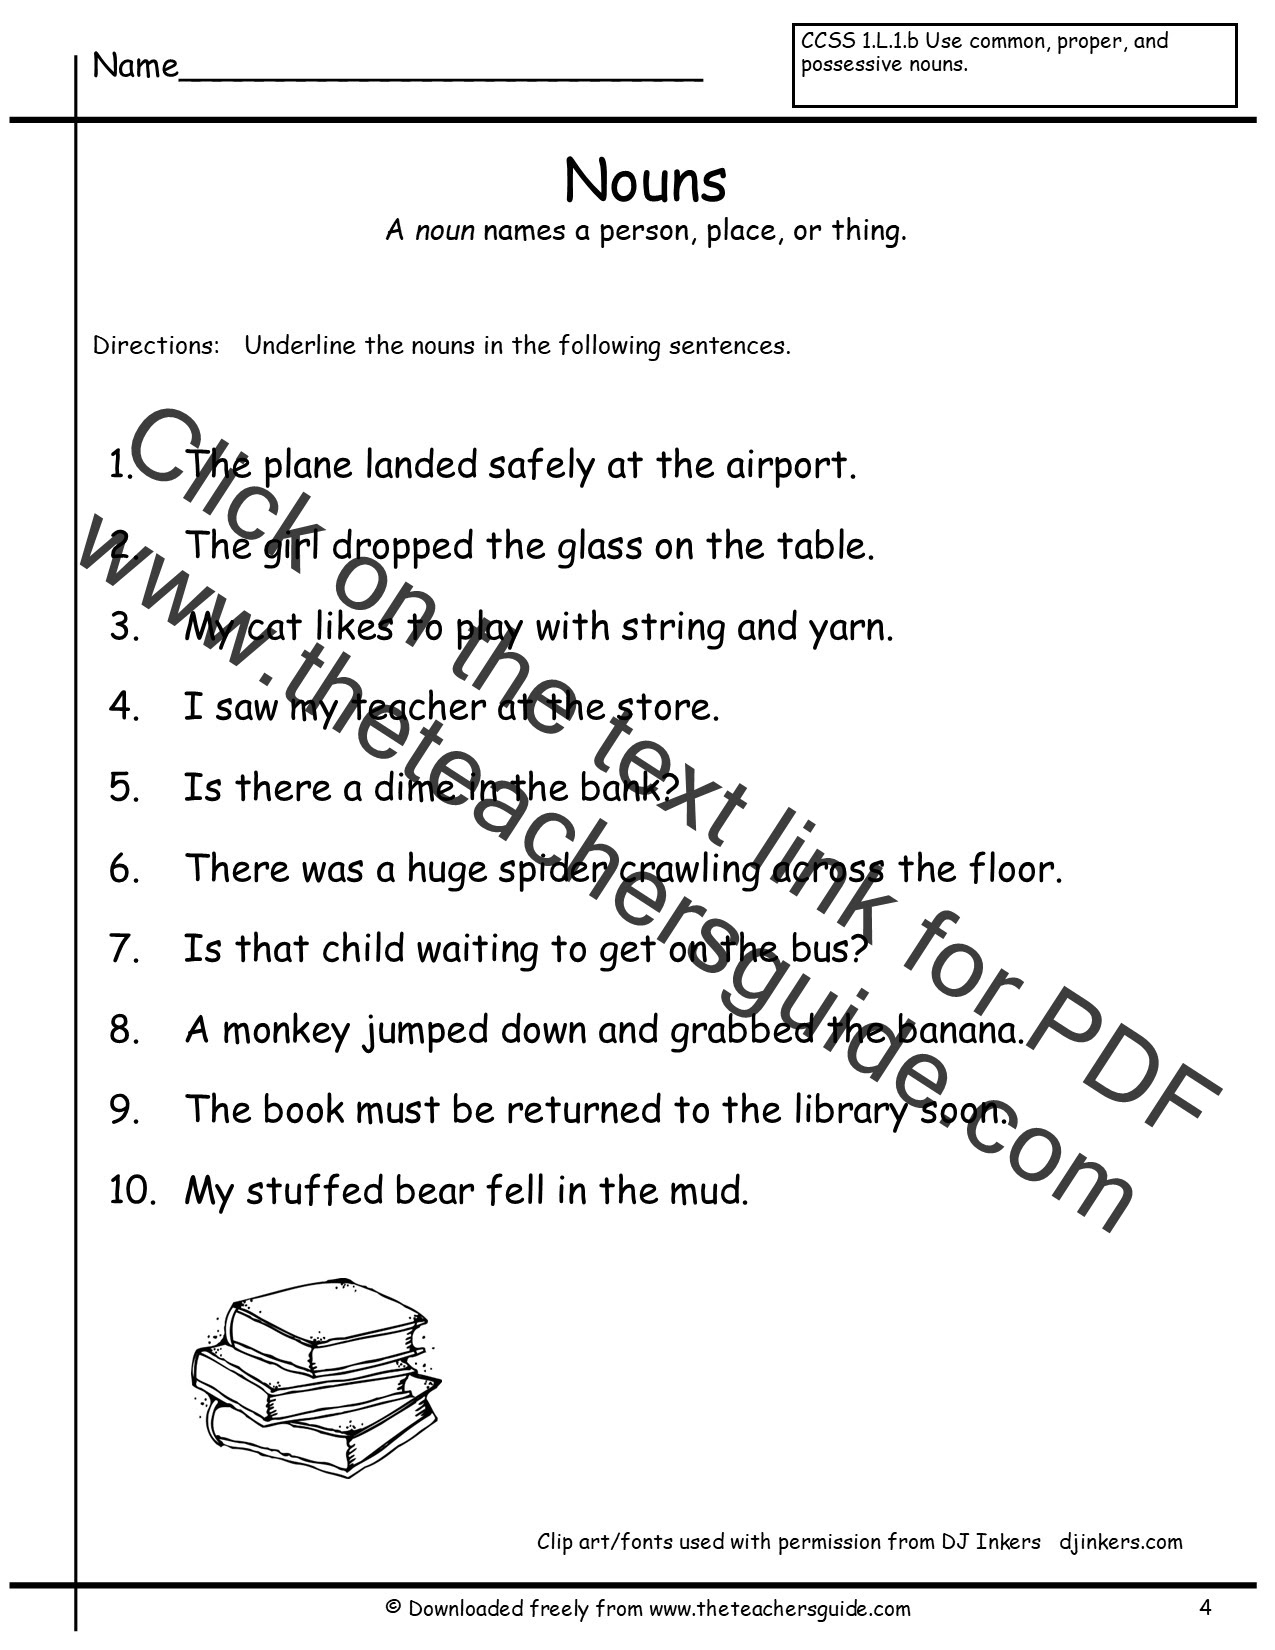 nouns-exercises-for-class-4-worksheets